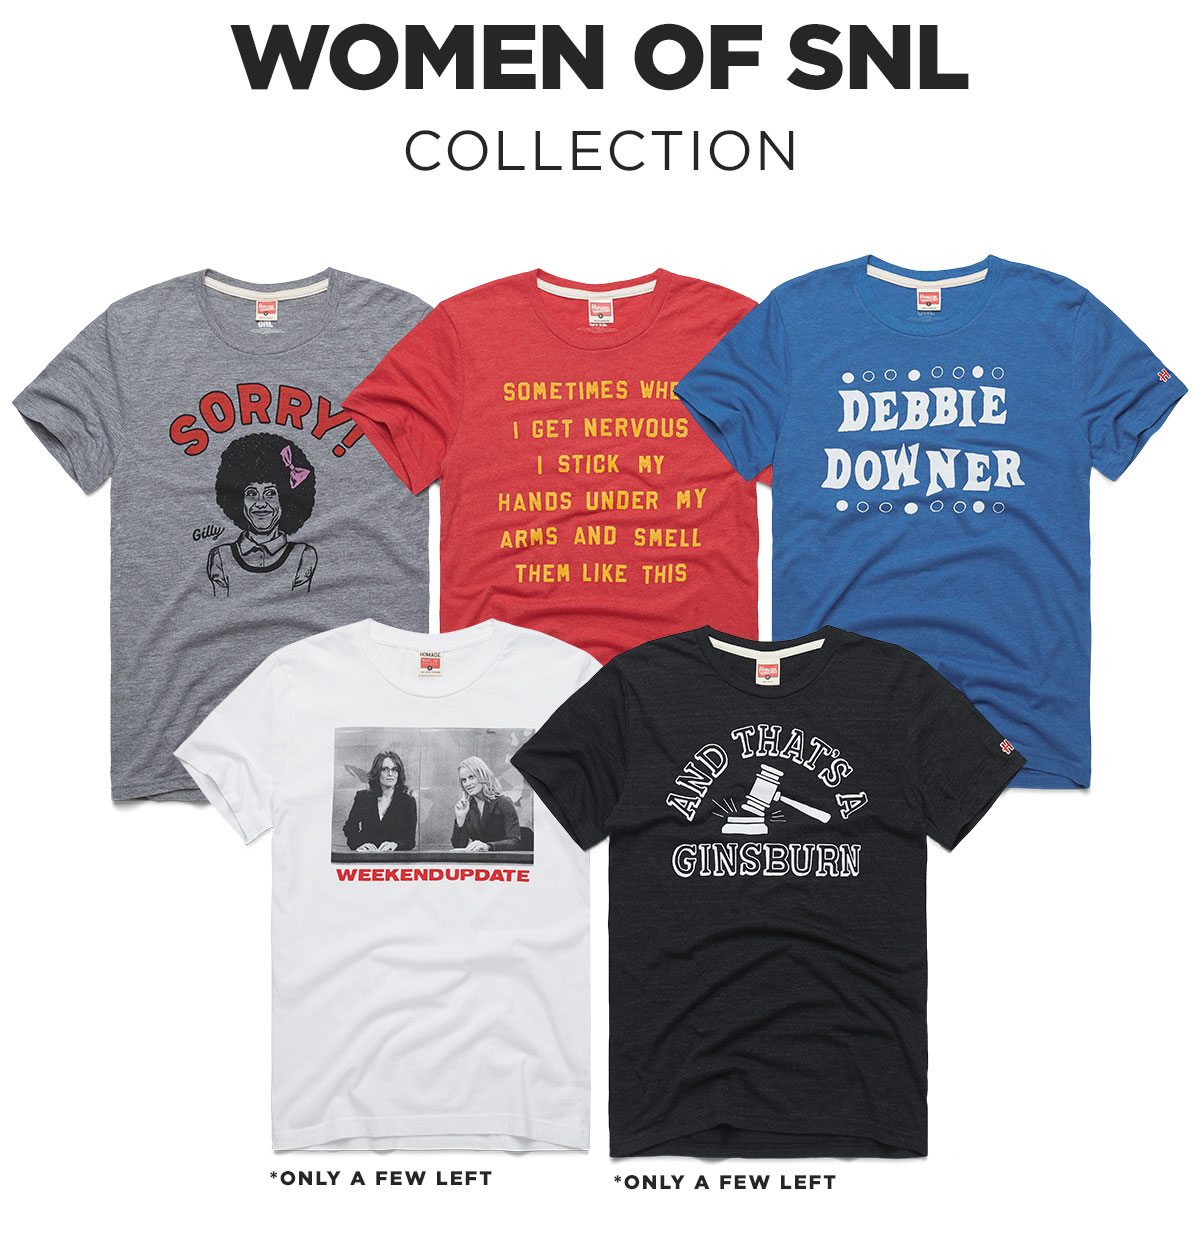 Women of SNL Collection